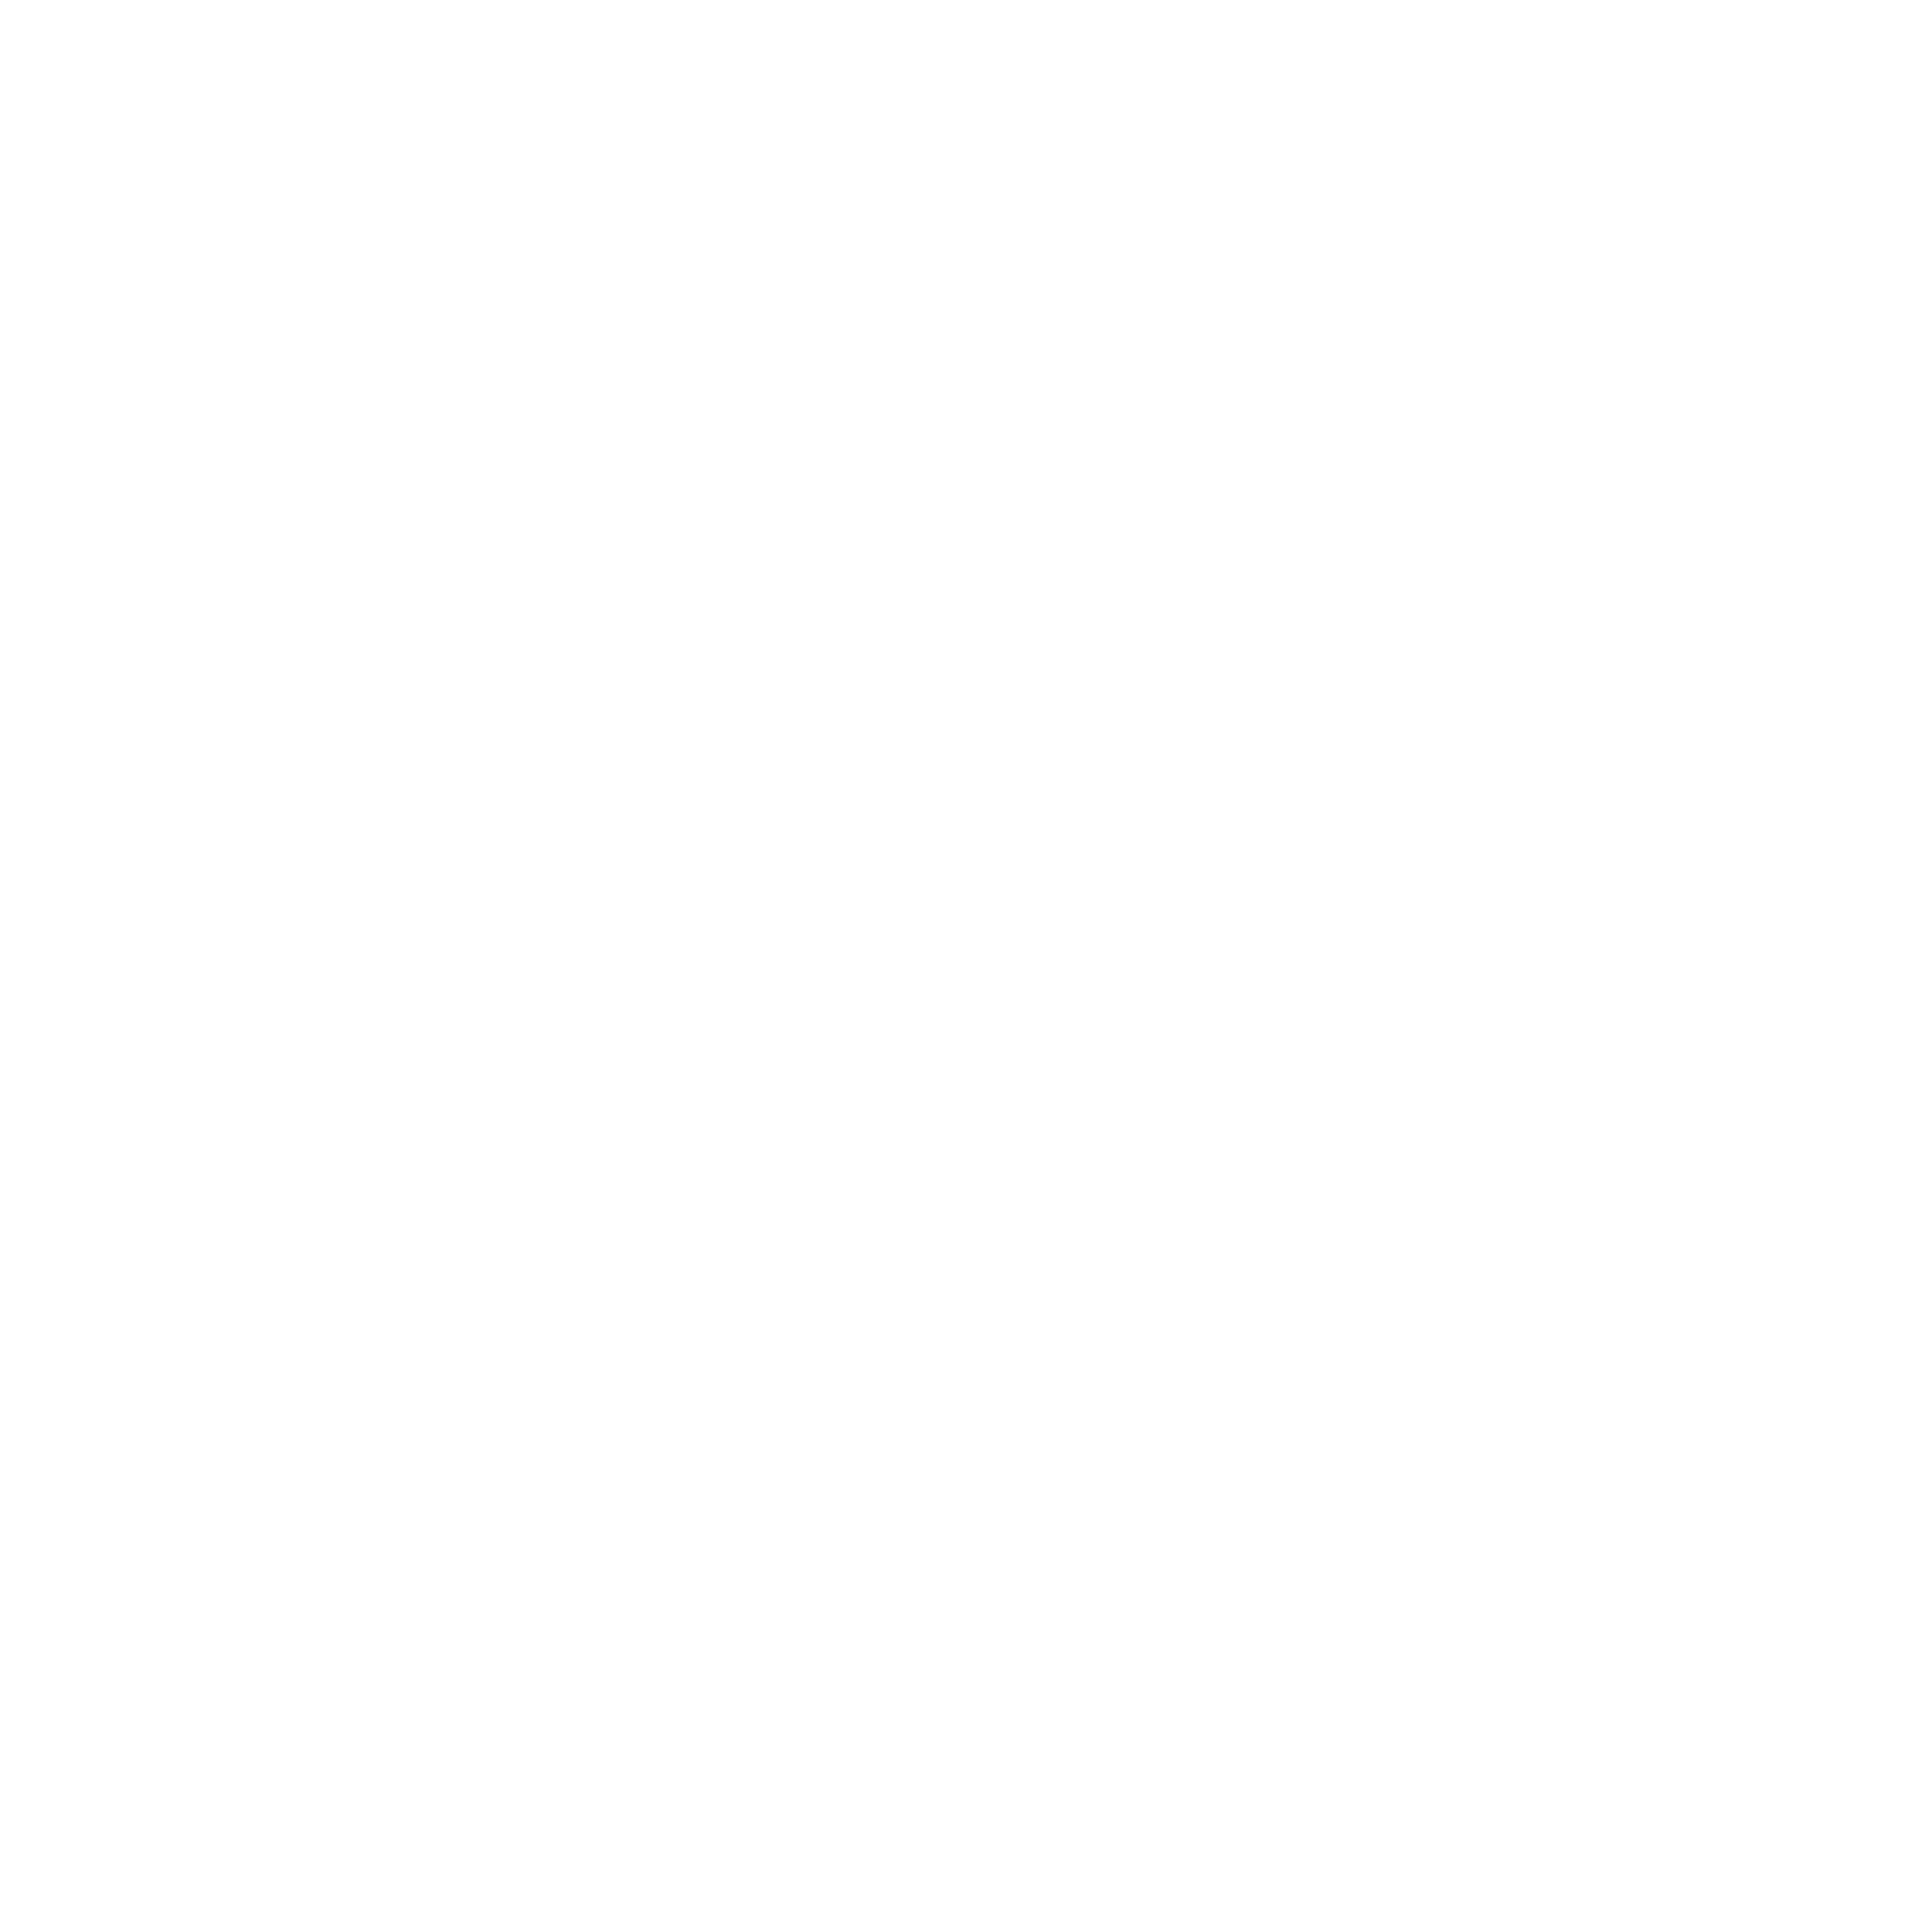 382 Louis vuitton vector images at www.semadata.org